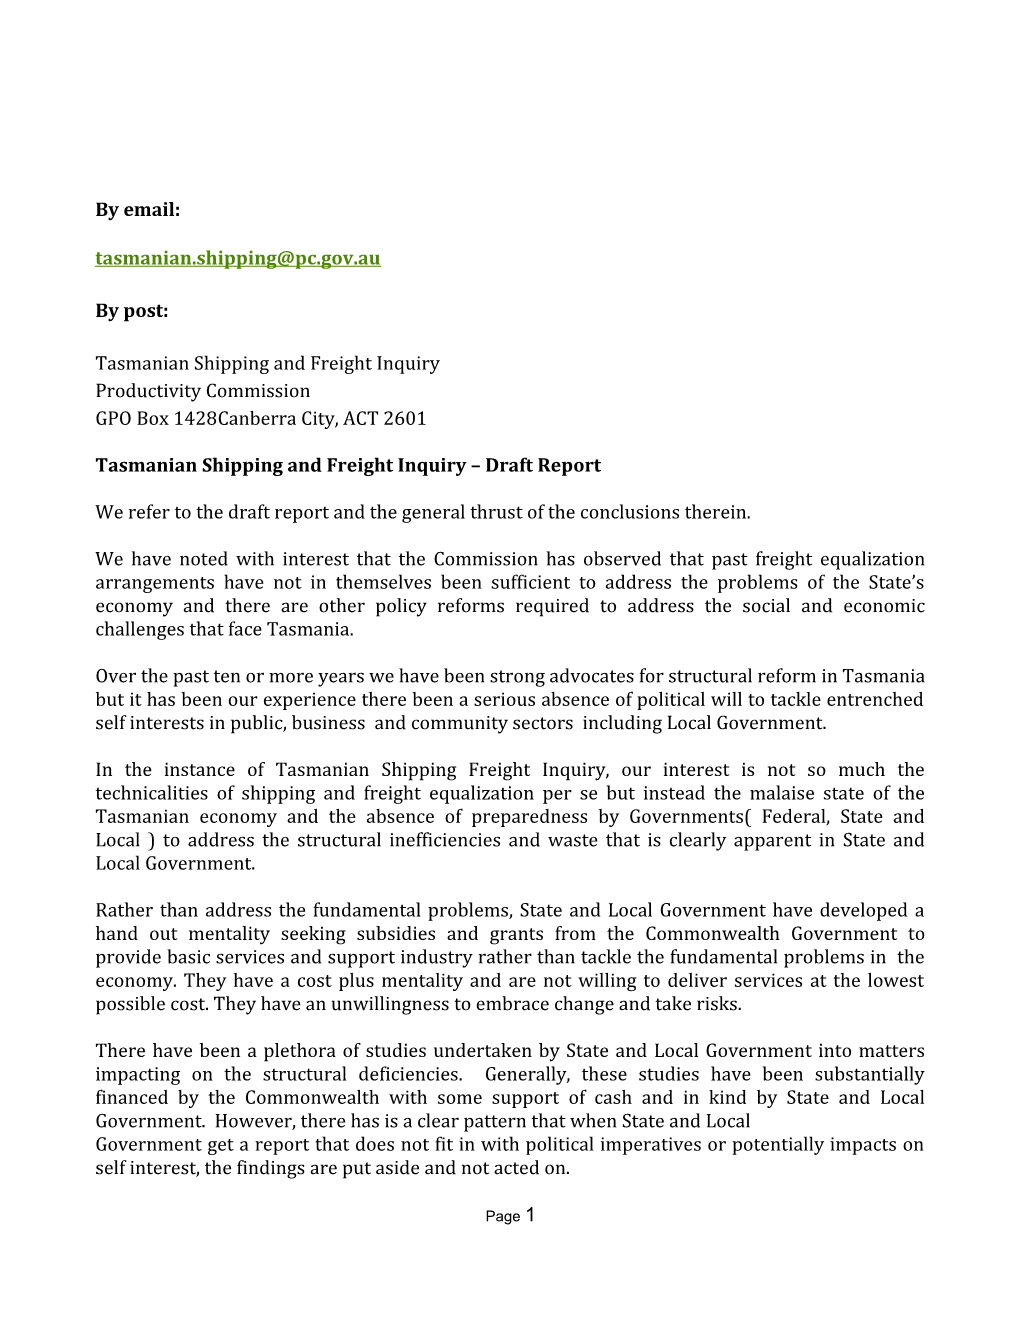 Submission DR69 - Nekon Pty Limited - Tasmanian Shipping and Freight - Public Inquiry